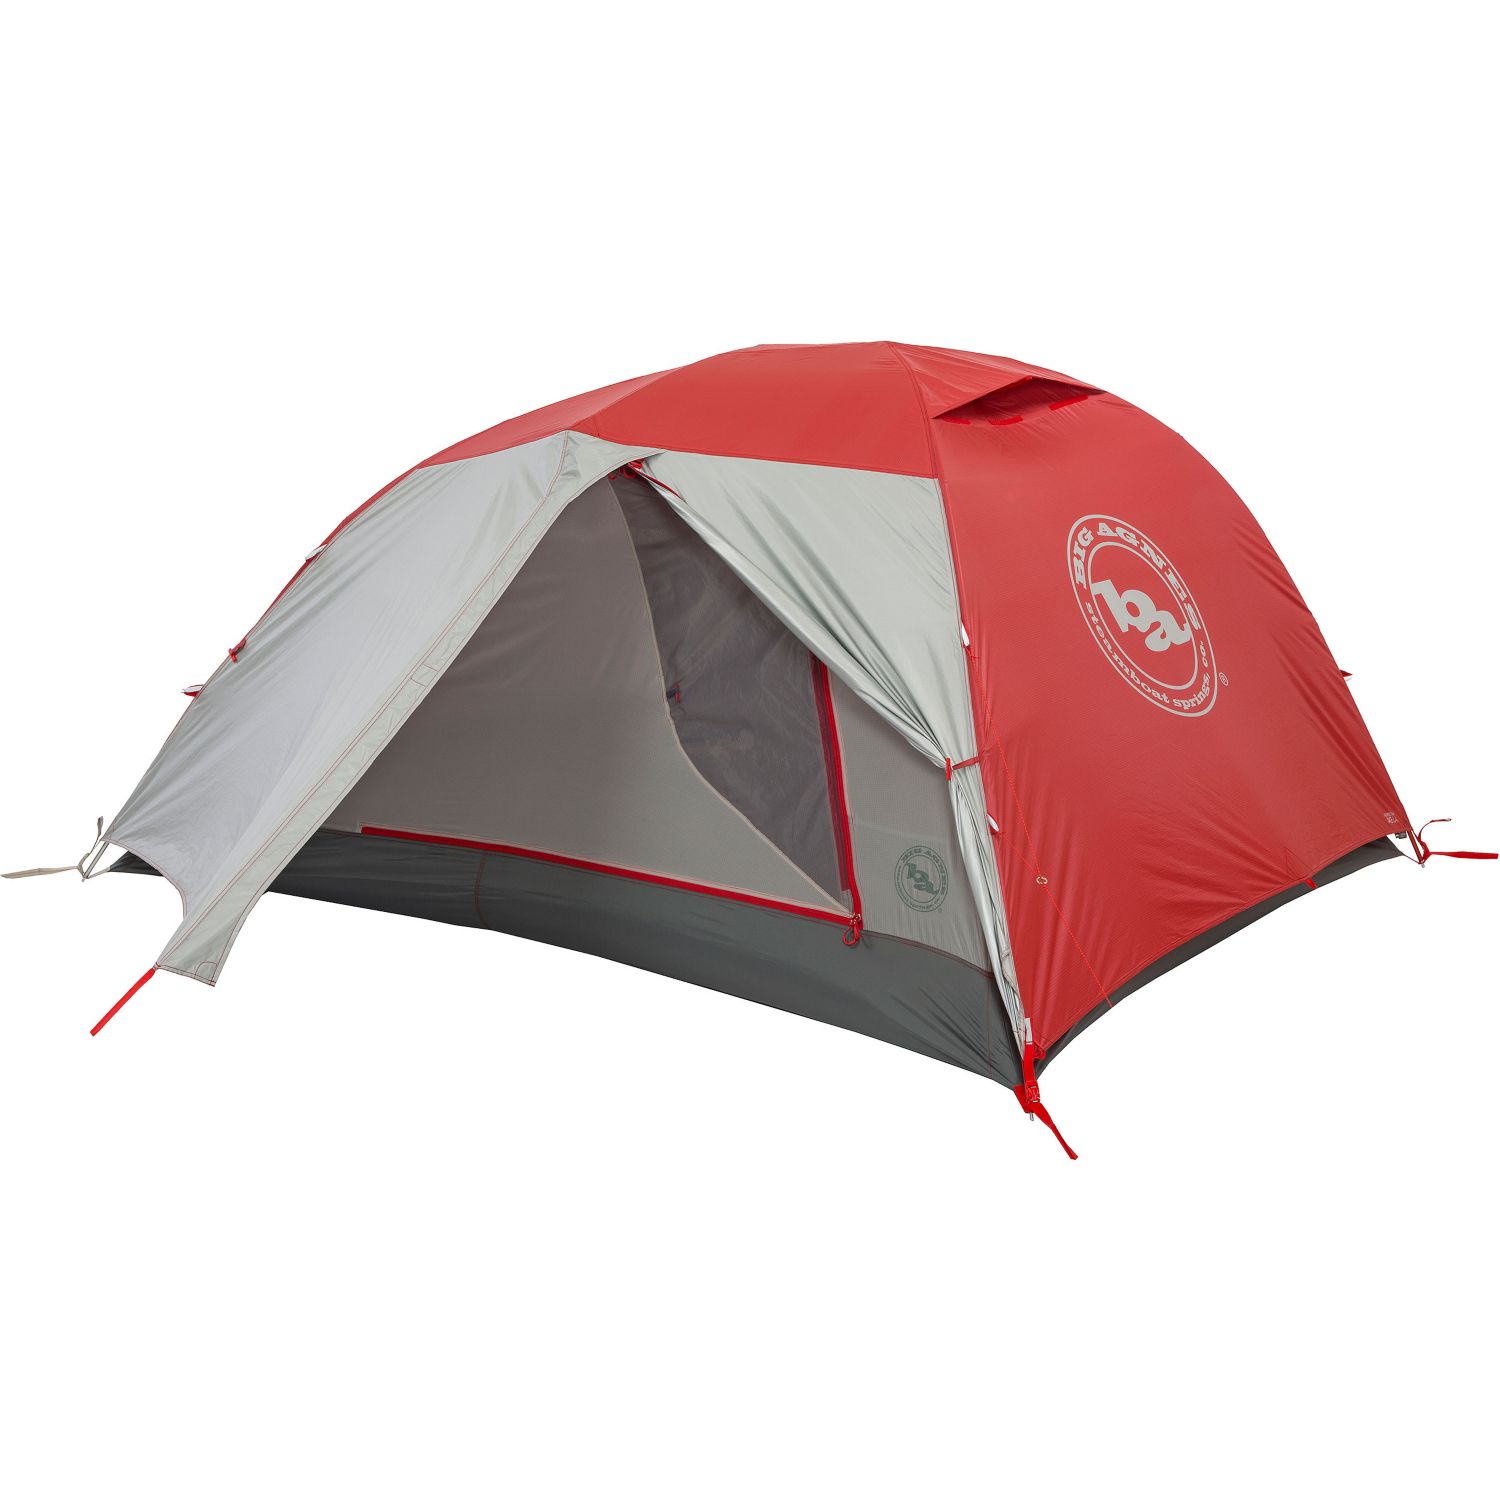 Copper Spur HV2 Expedition Red